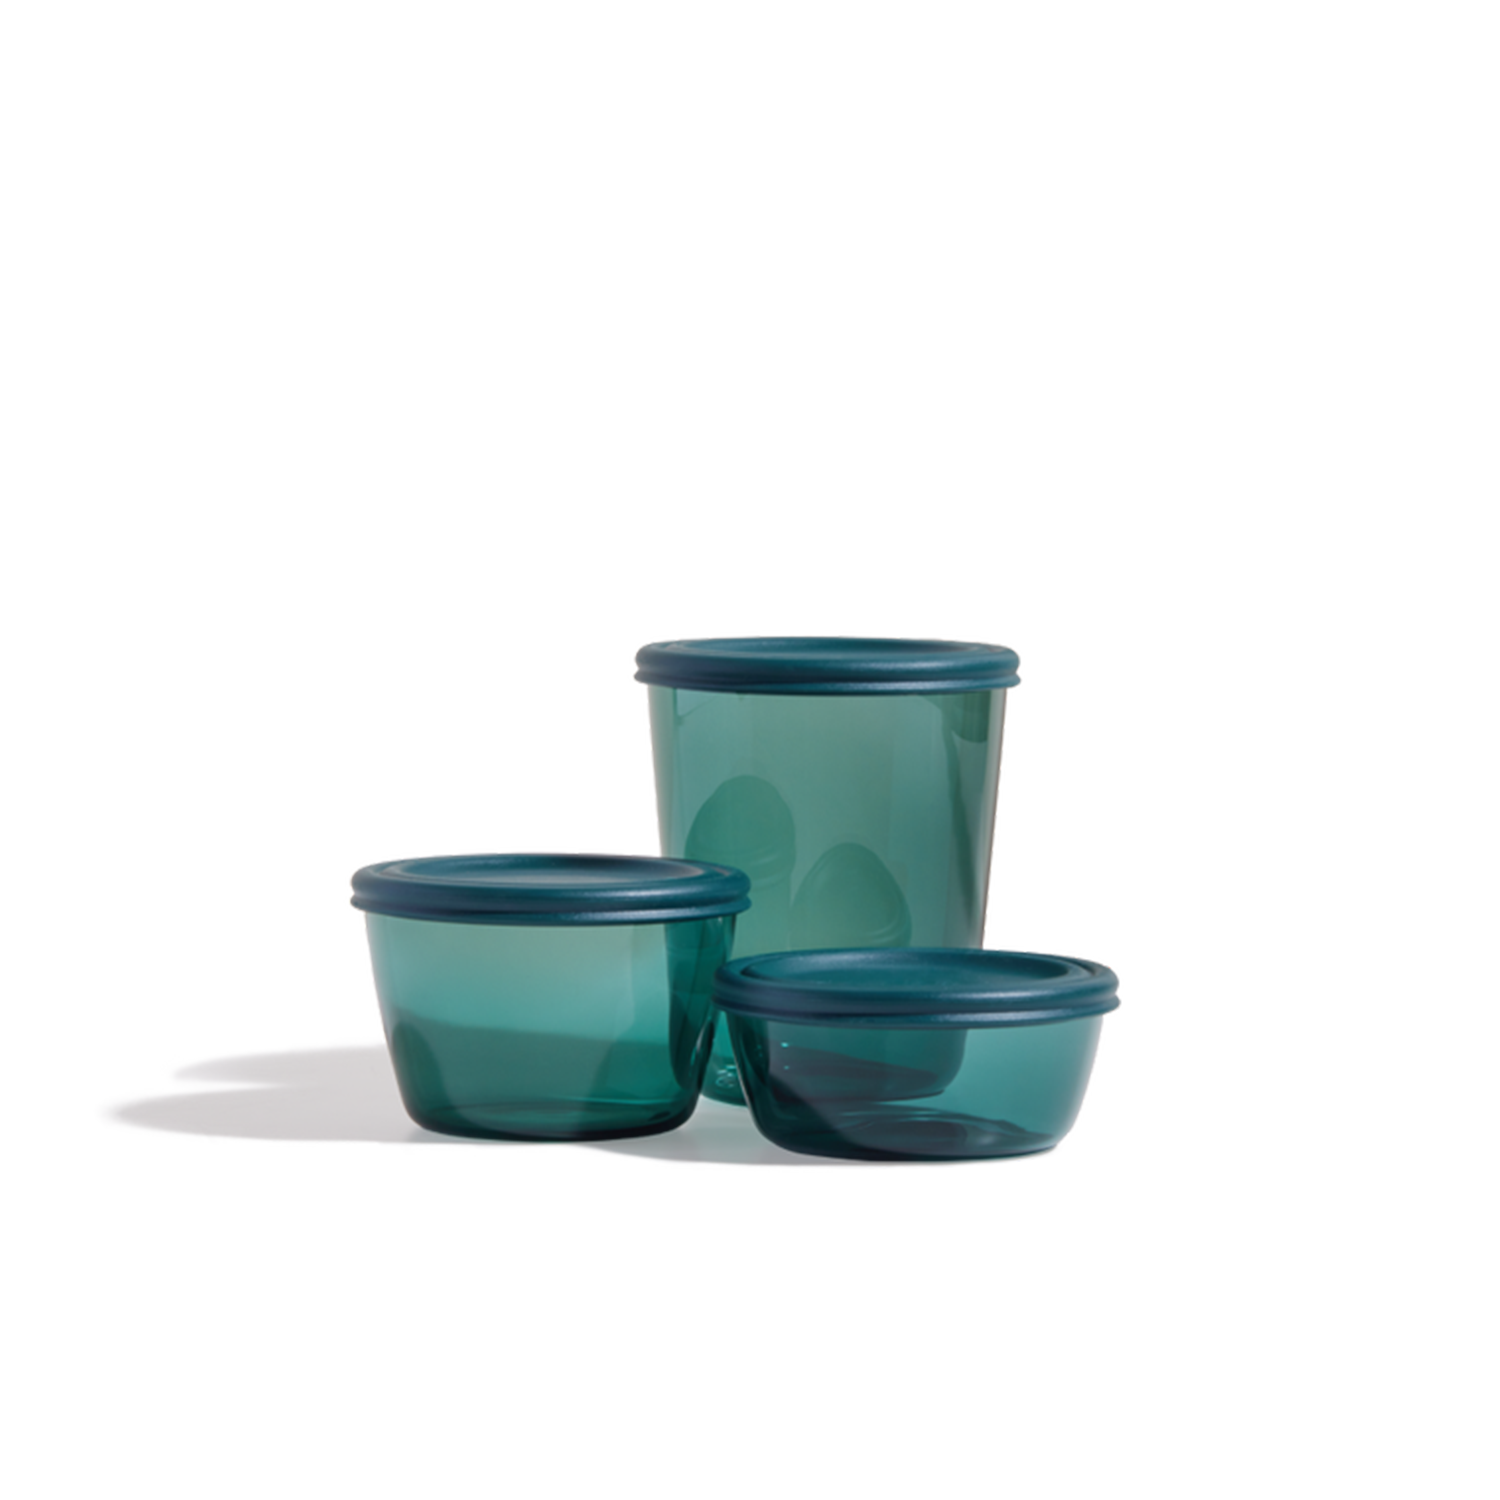 Our Place’s First-Ever Food Containers Are Impossible to Mismatch—Or Topple Over